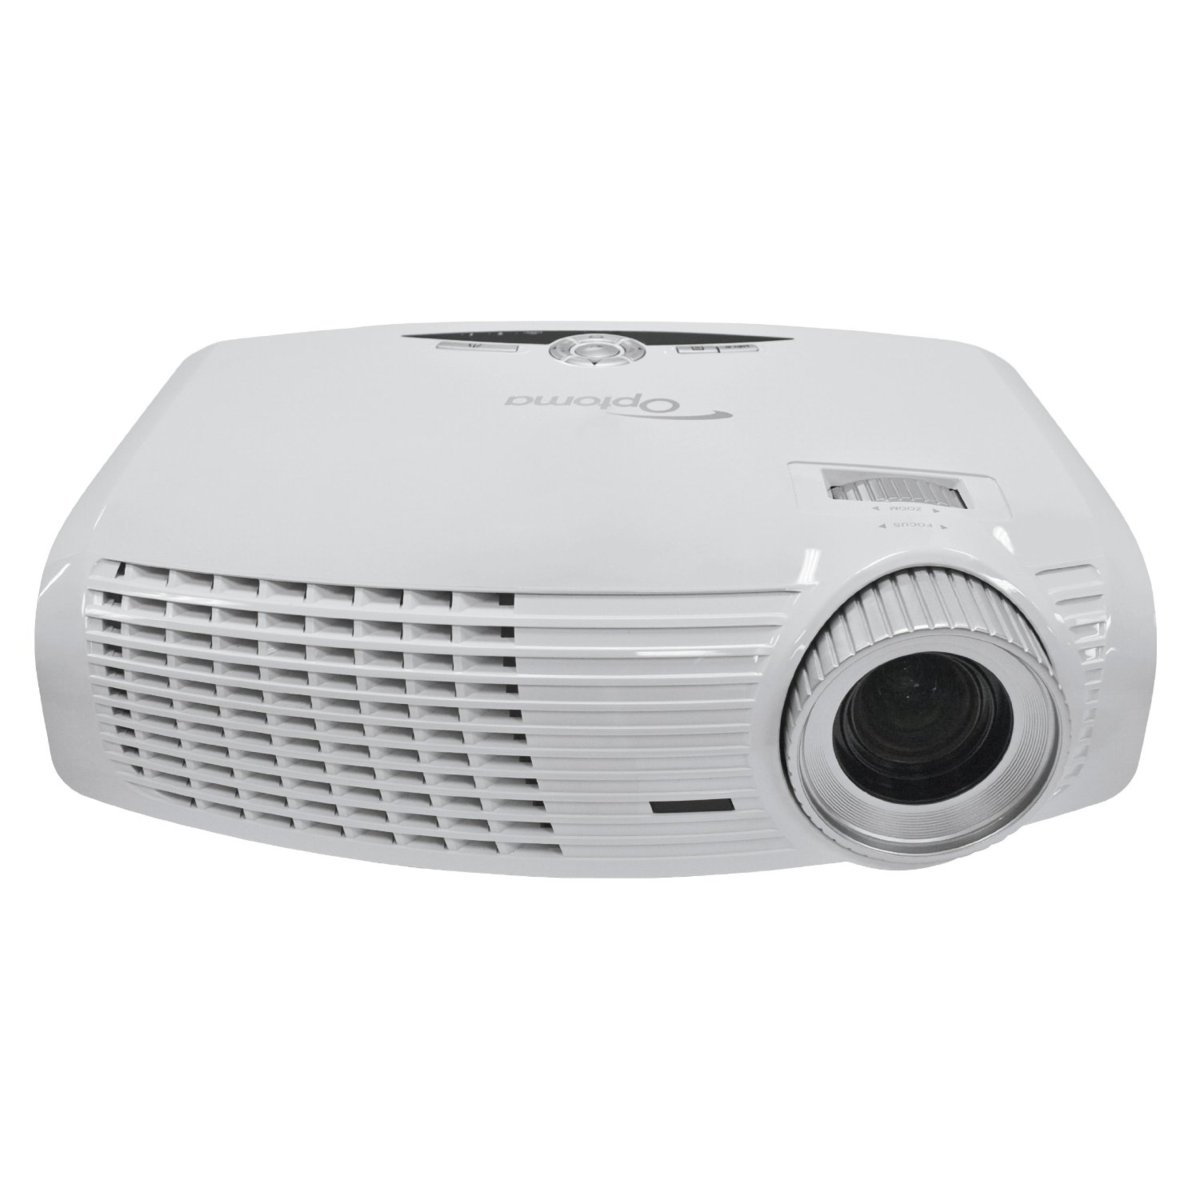 Optoma HD20 High Definition 1080p_Front.jpg